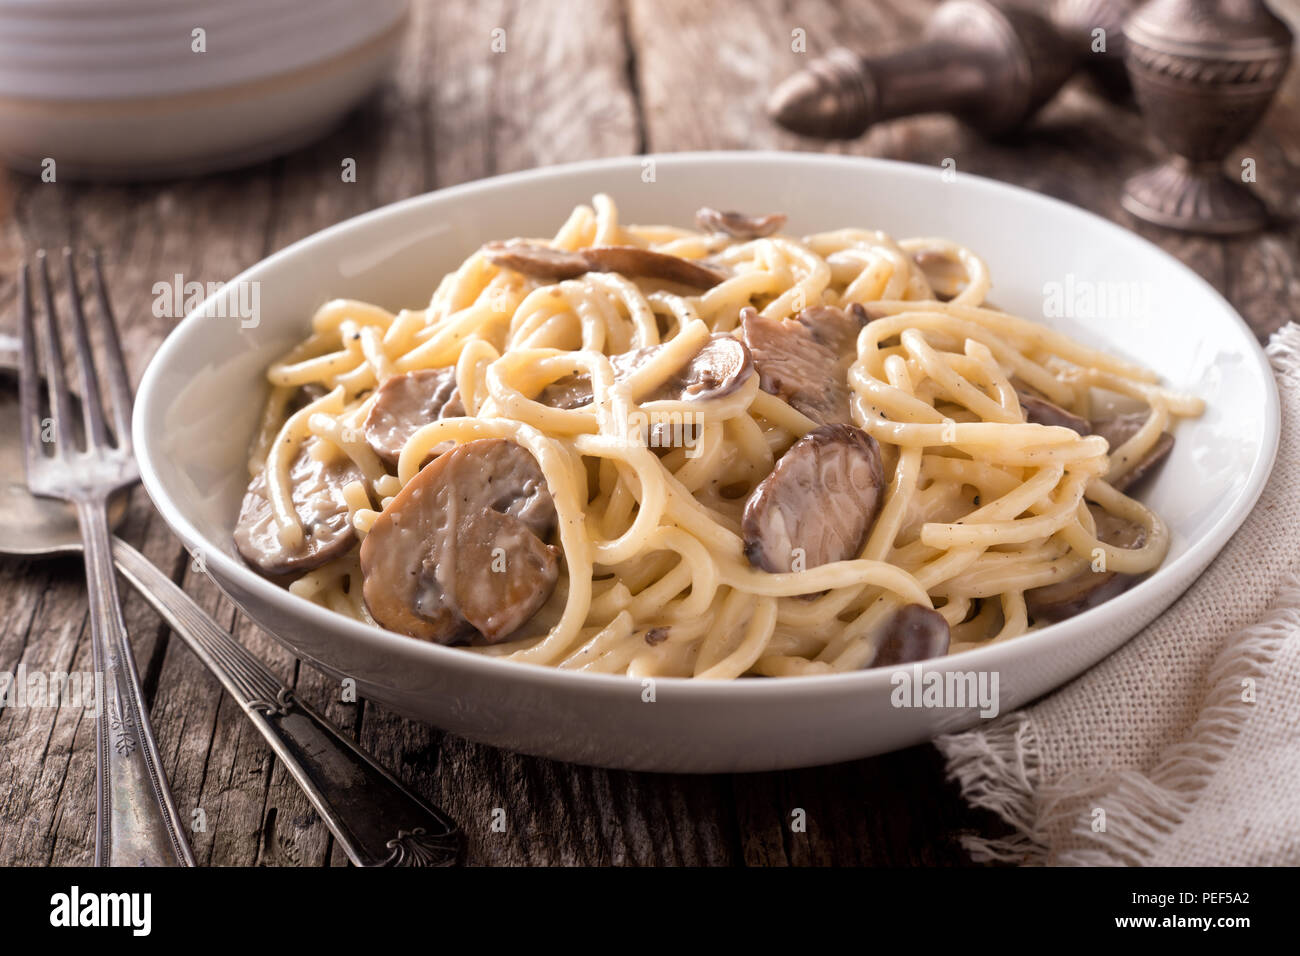 A bowl of delicious pasta alfredo with mushrooms on a rustic table top. Stock Photo